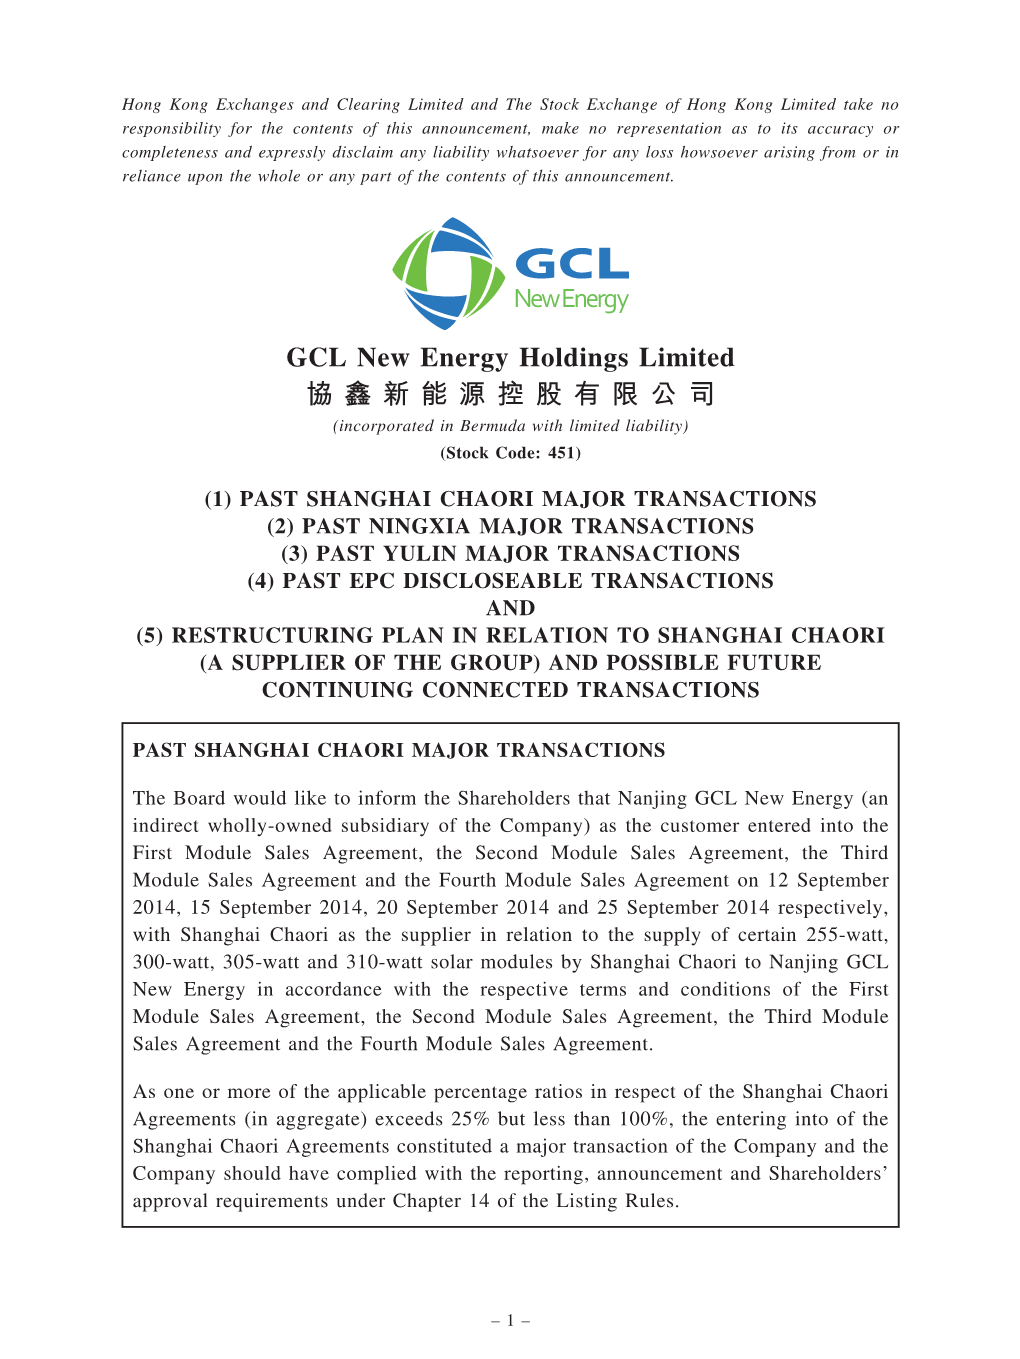 GCL New Energy Holdings Limited 協 鑫 新 能 源 控 股 有 限 公 司 (Incorporated in Bermuda with Limited Liability) (Stock Code: 451)